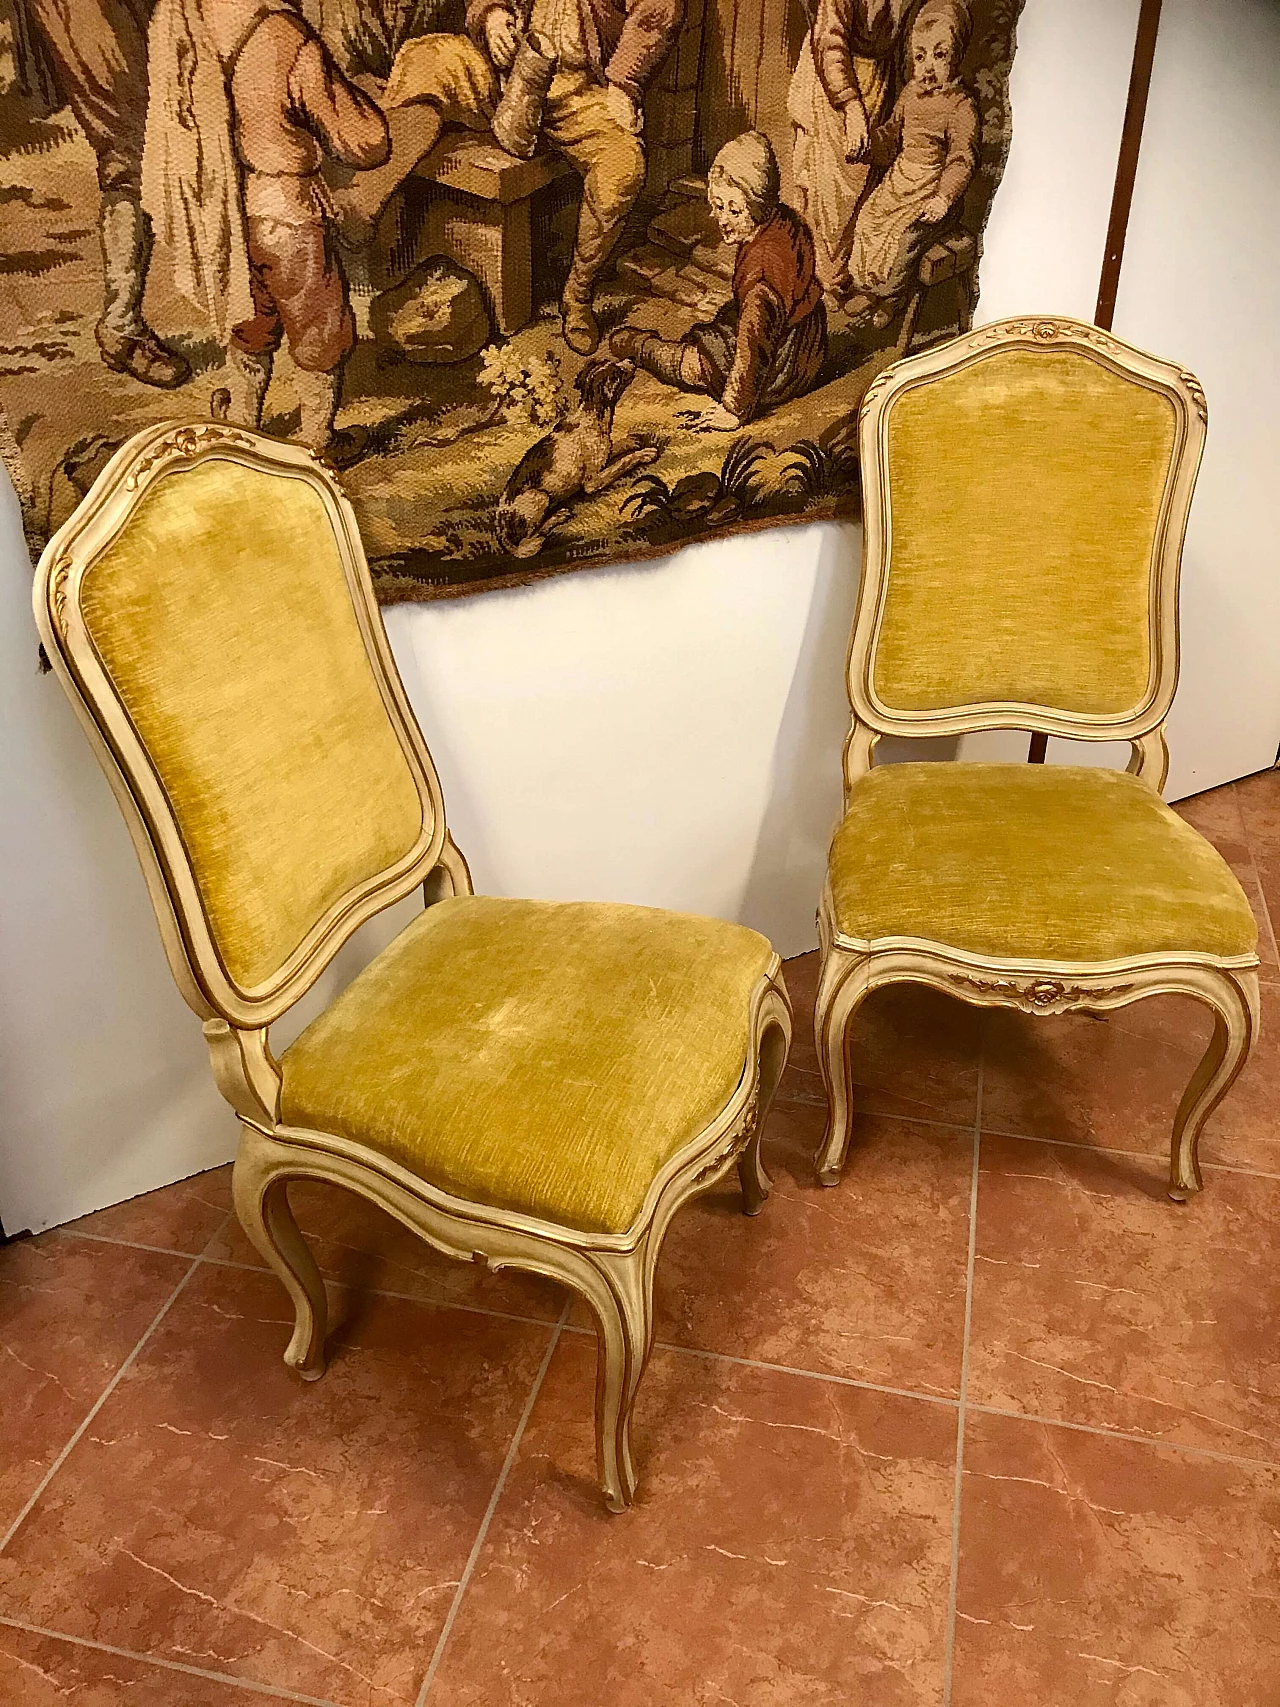 Set of 1 armchair and 2 lacquered and gilded chairs lined with gold-colored velvet, original mid 20th century 1222449